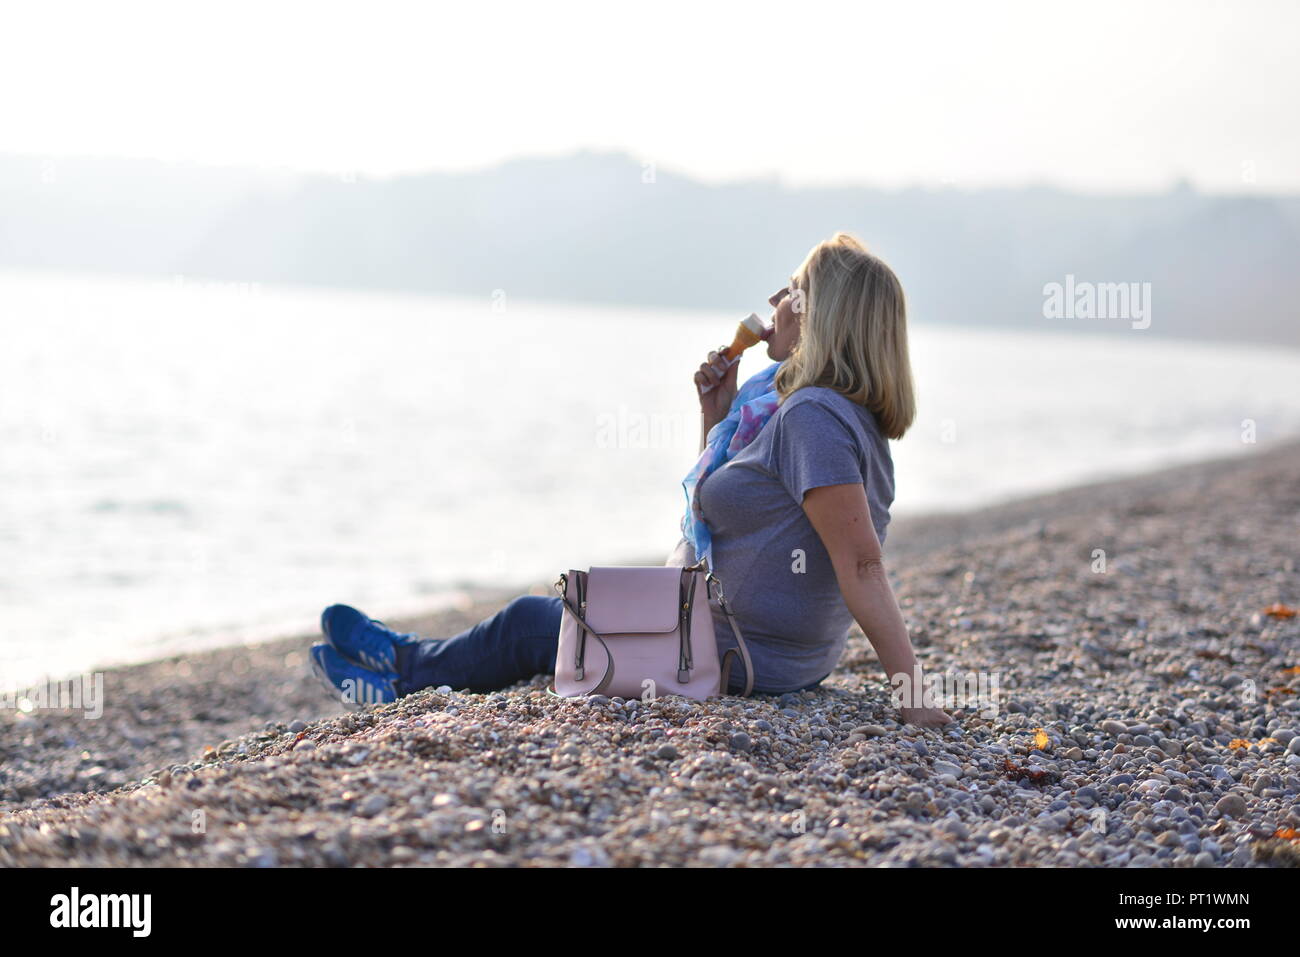 A woman eating an ice cream and relaxing on the pebble beach during warm Indian summer weather at Seaton, Devon, England, UK Stock Photo